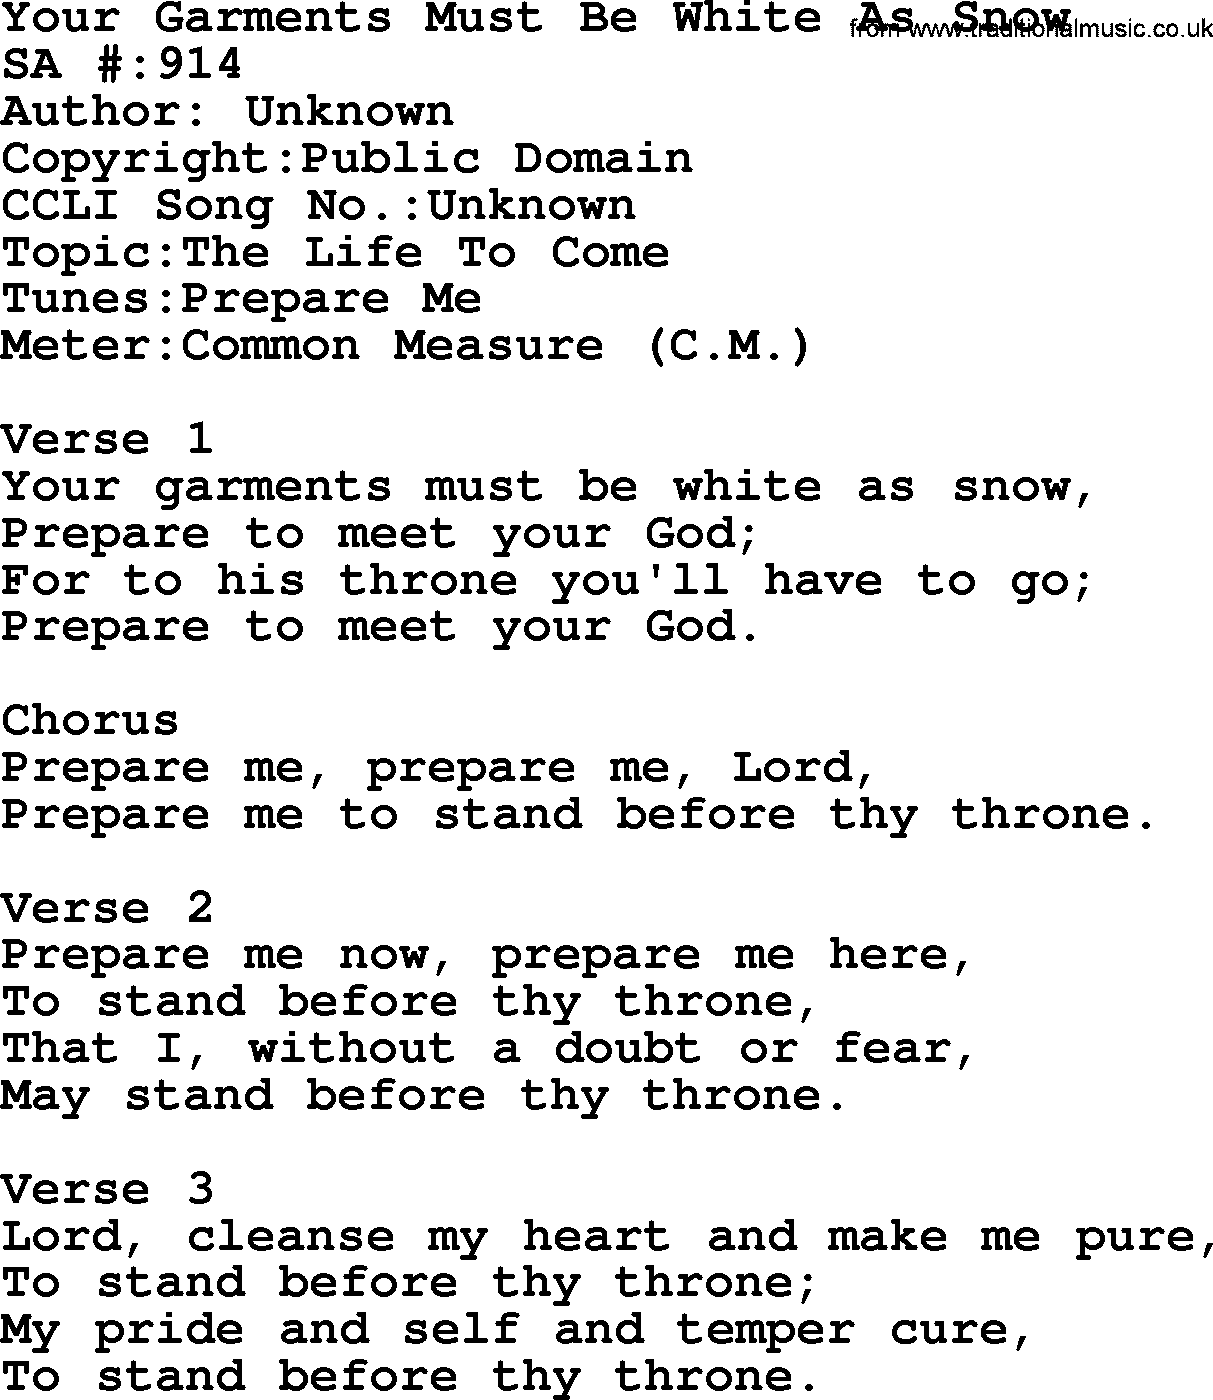 Salvation Army Hymnal, title: Your Garments Must Be White As Snow, with lyrics and PDF,